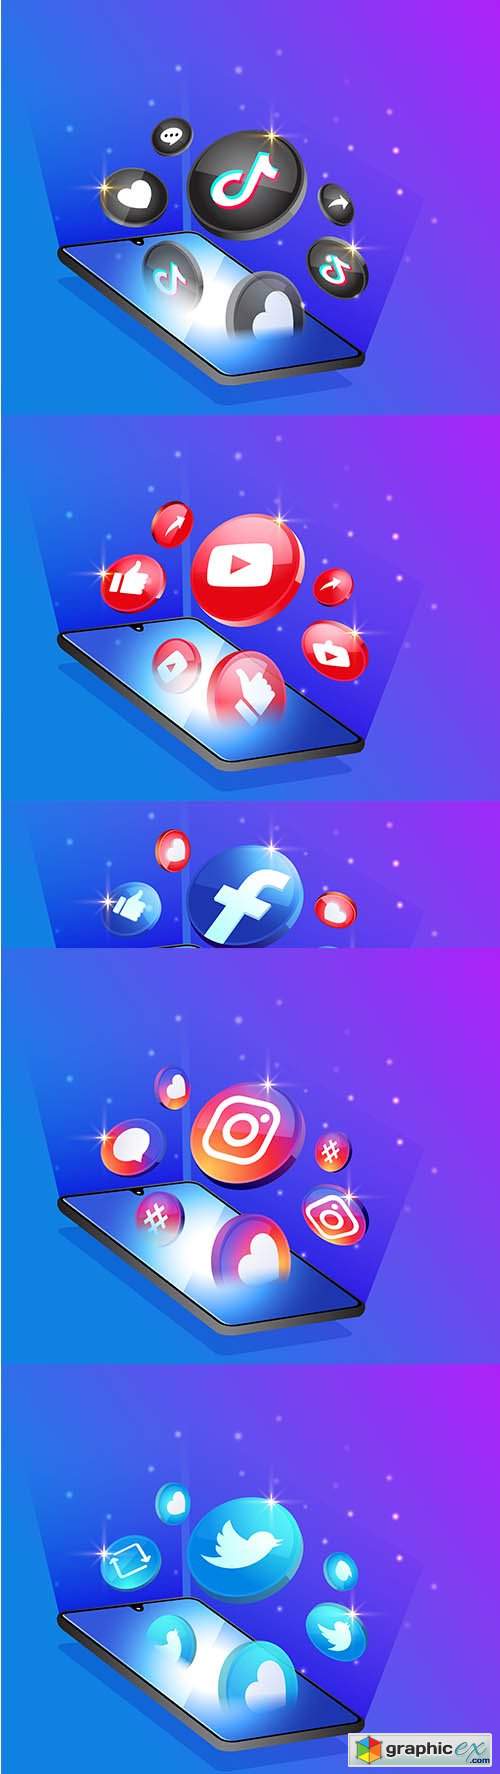  3d social media icons with smartphone symbol 